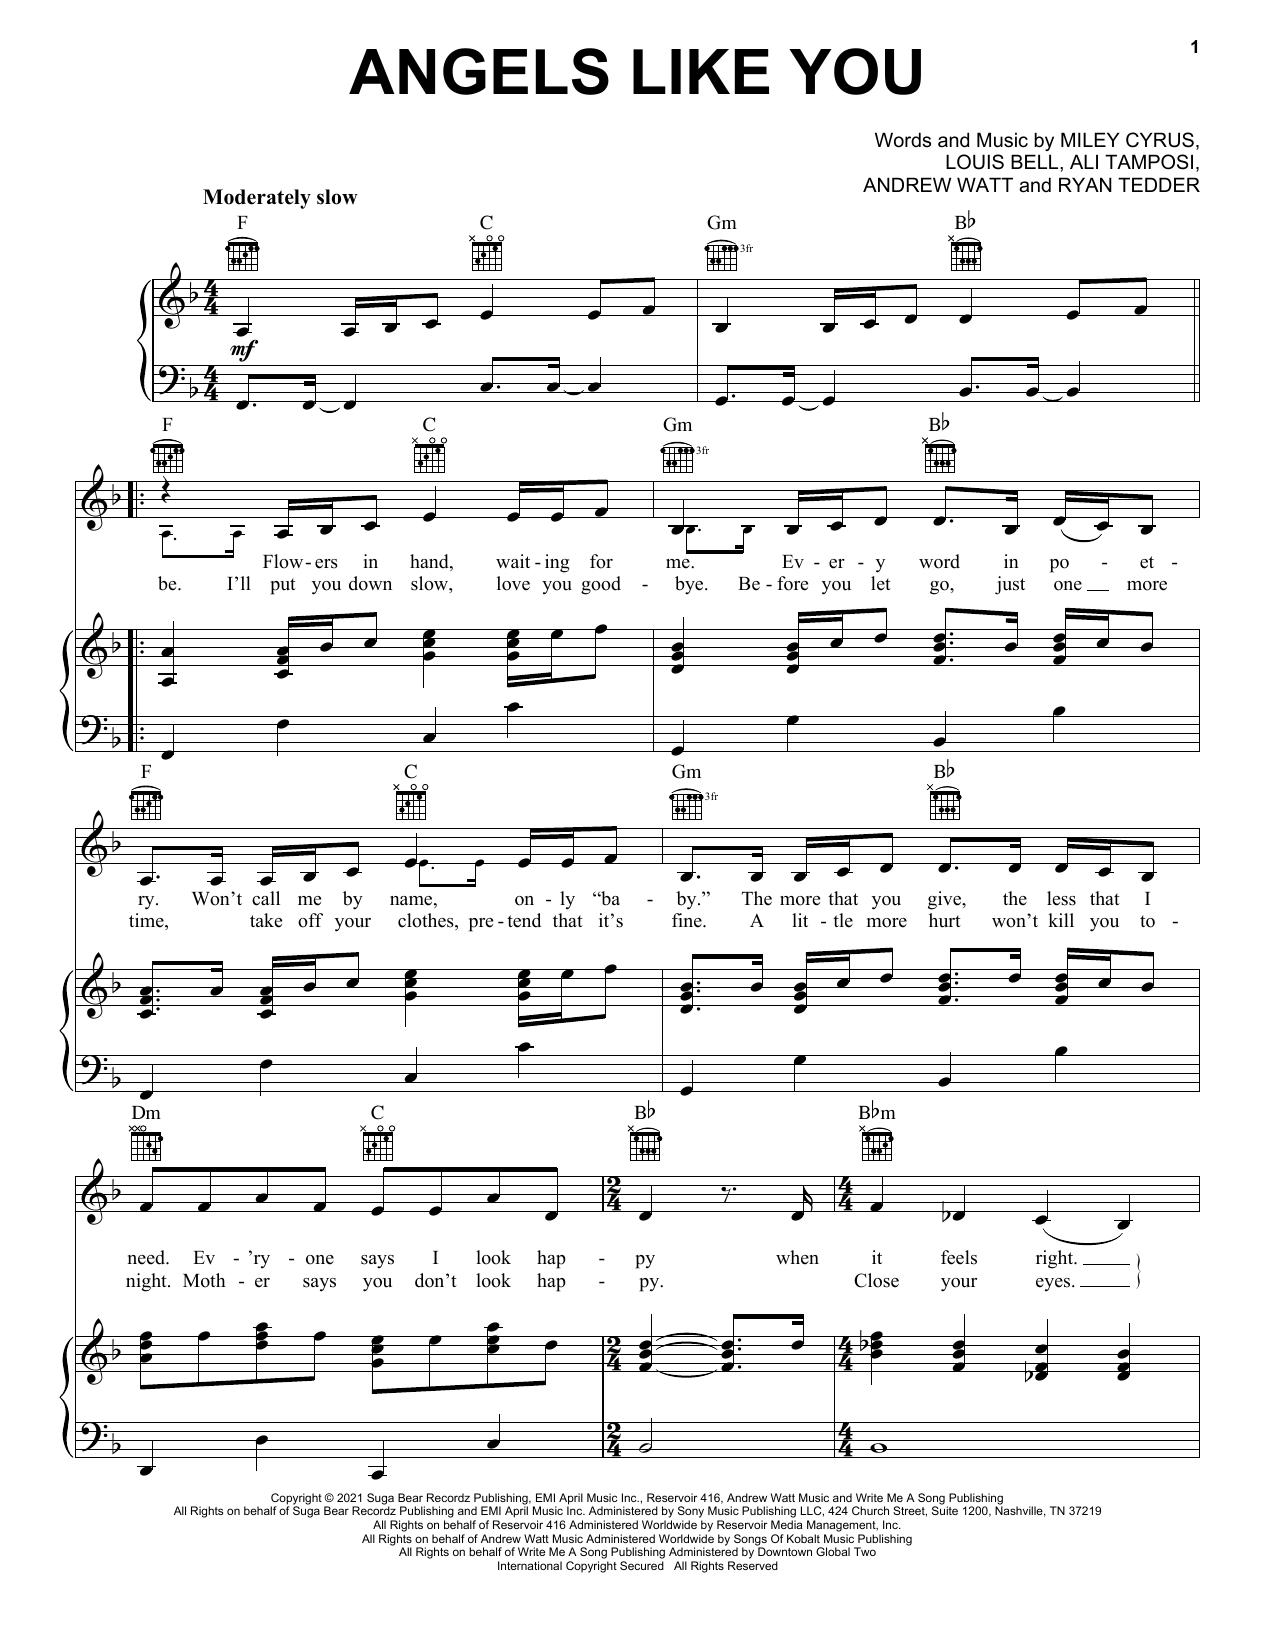 Download Miley Cyrus Angels Like You Sheet Music